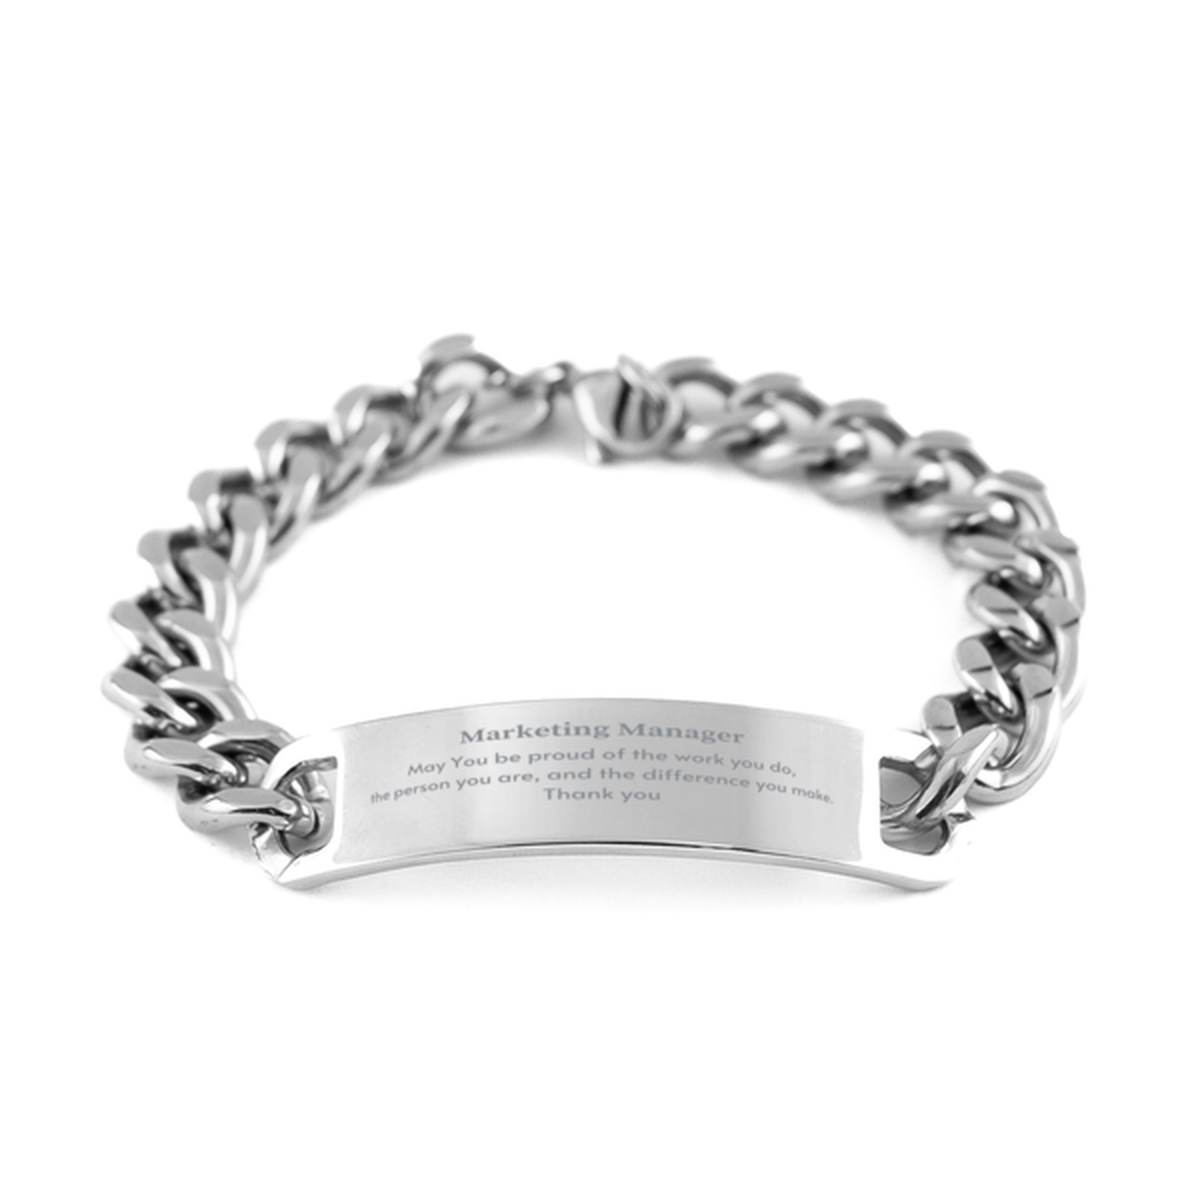 Heartwarming Cuban Chain Stainless Steel Bracelet Retirement Coworkers Gifts for Marketing Manager, Marketing Manager May You be proud of the work you do, the person you are Gifts for Boss Men Women Friends